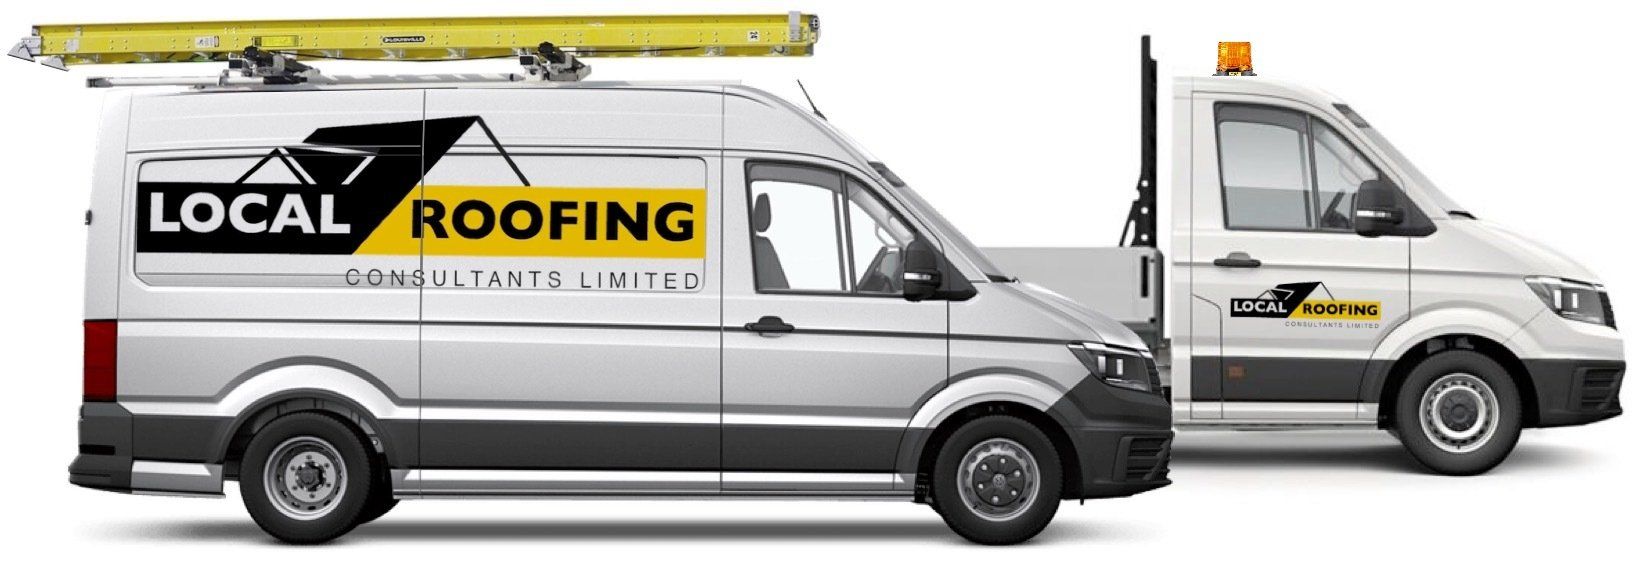 Local Roofing Consultants Limited work in Ruislip and throughout the London area